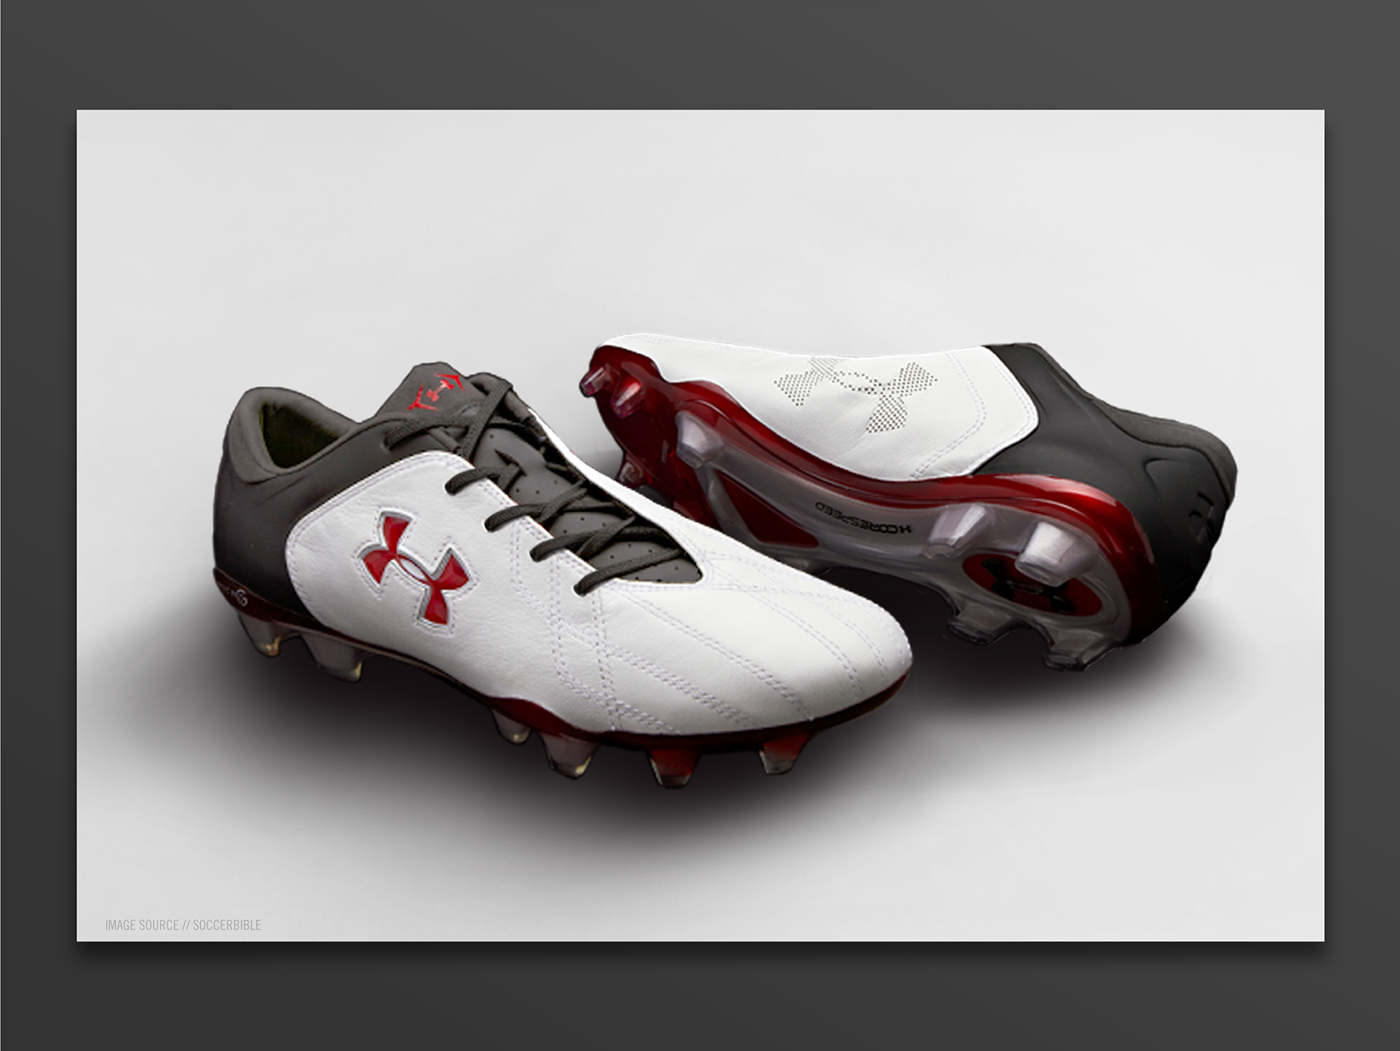 soccer football footwear cleat boot Under Armour design product design  industrial design 